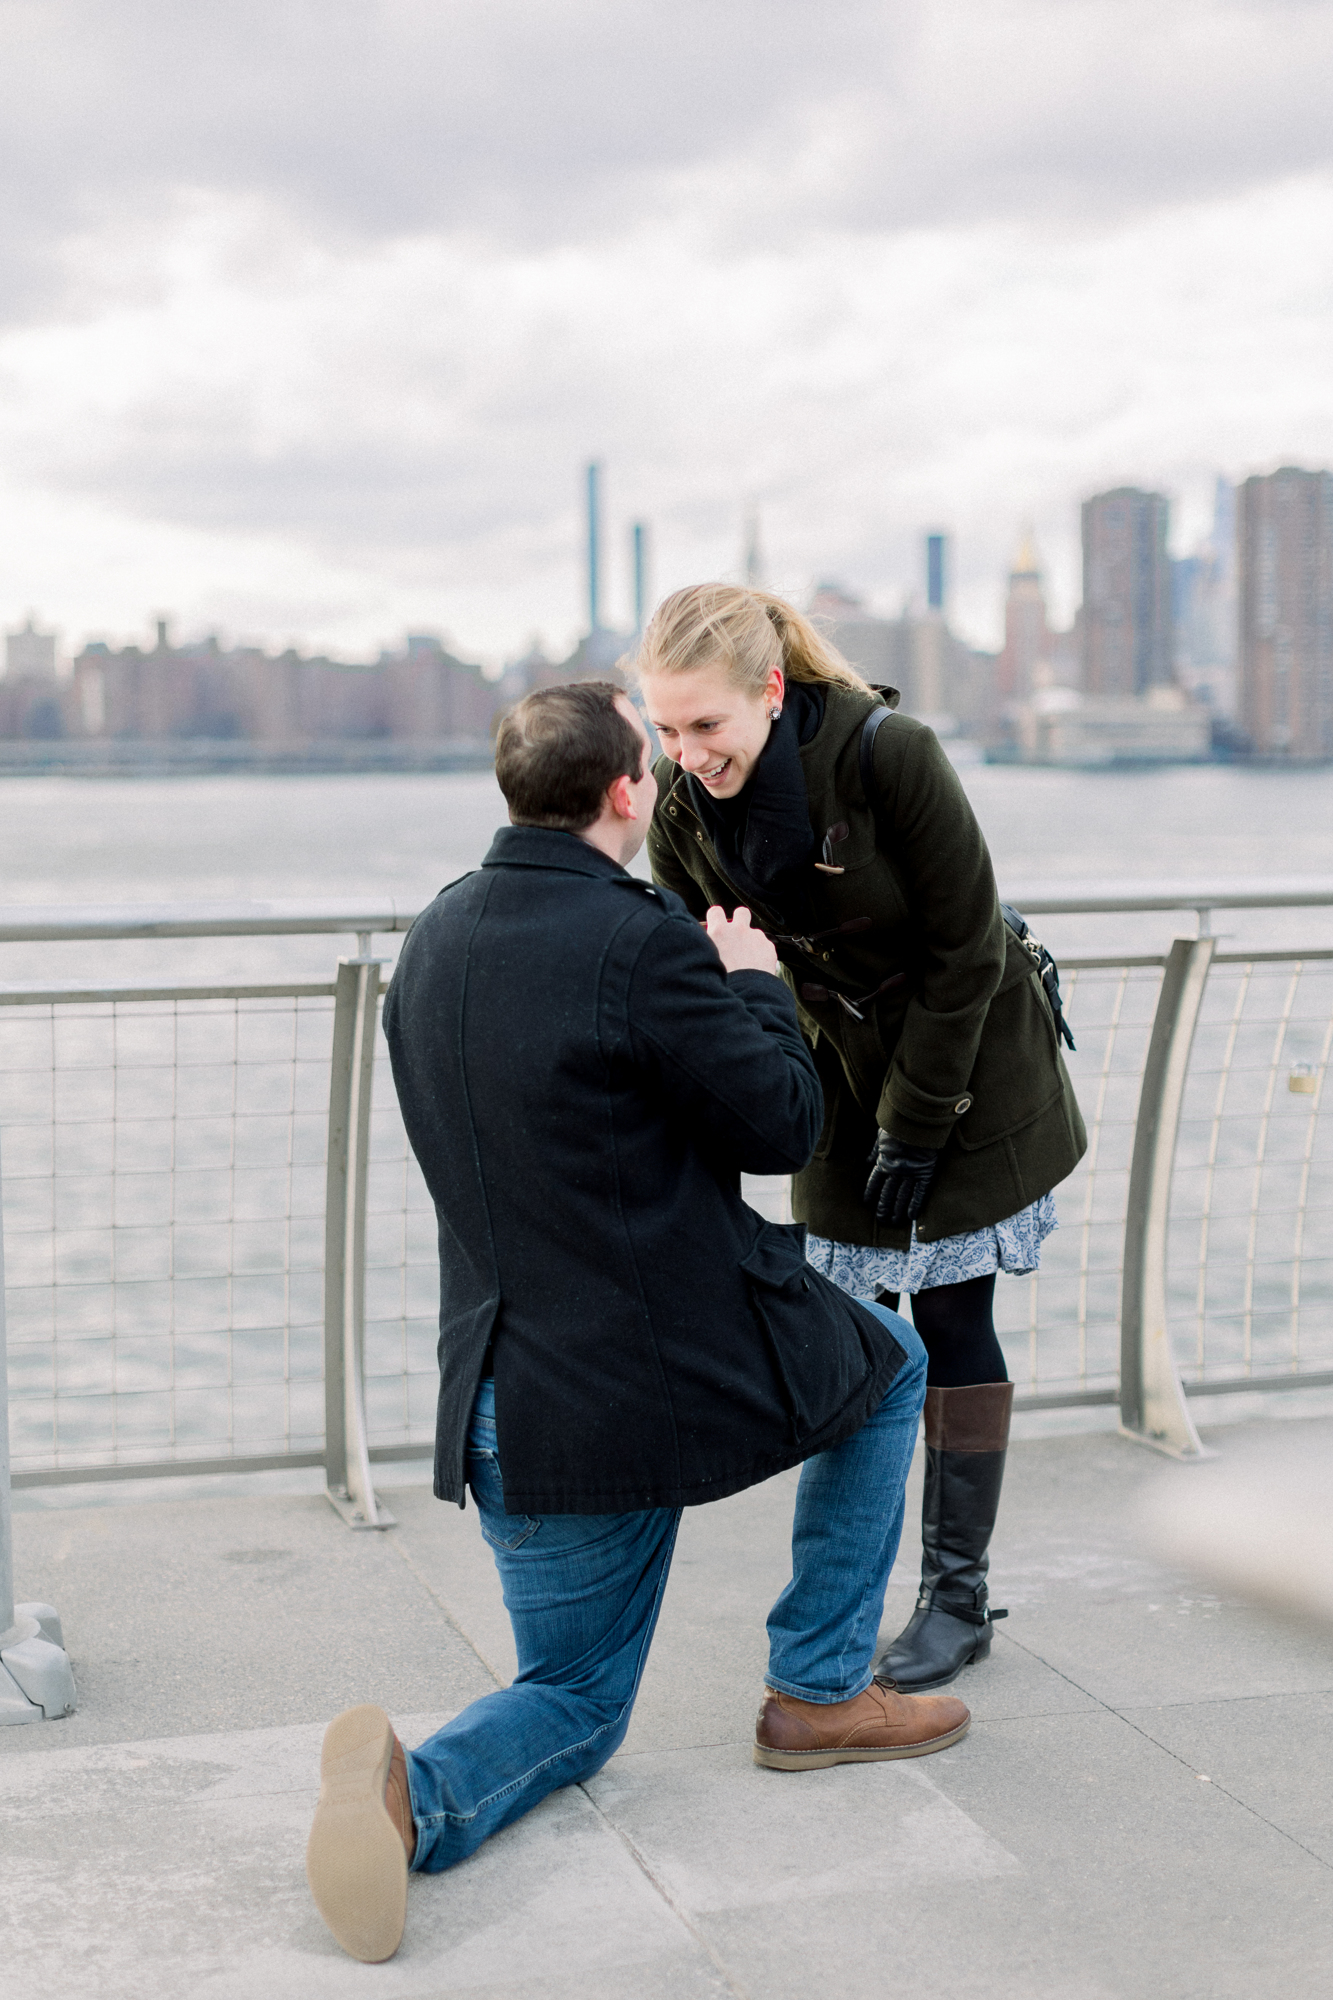 Memorable Wintery Proposal at Transmitter Park in Greenpoint, Brooklyn